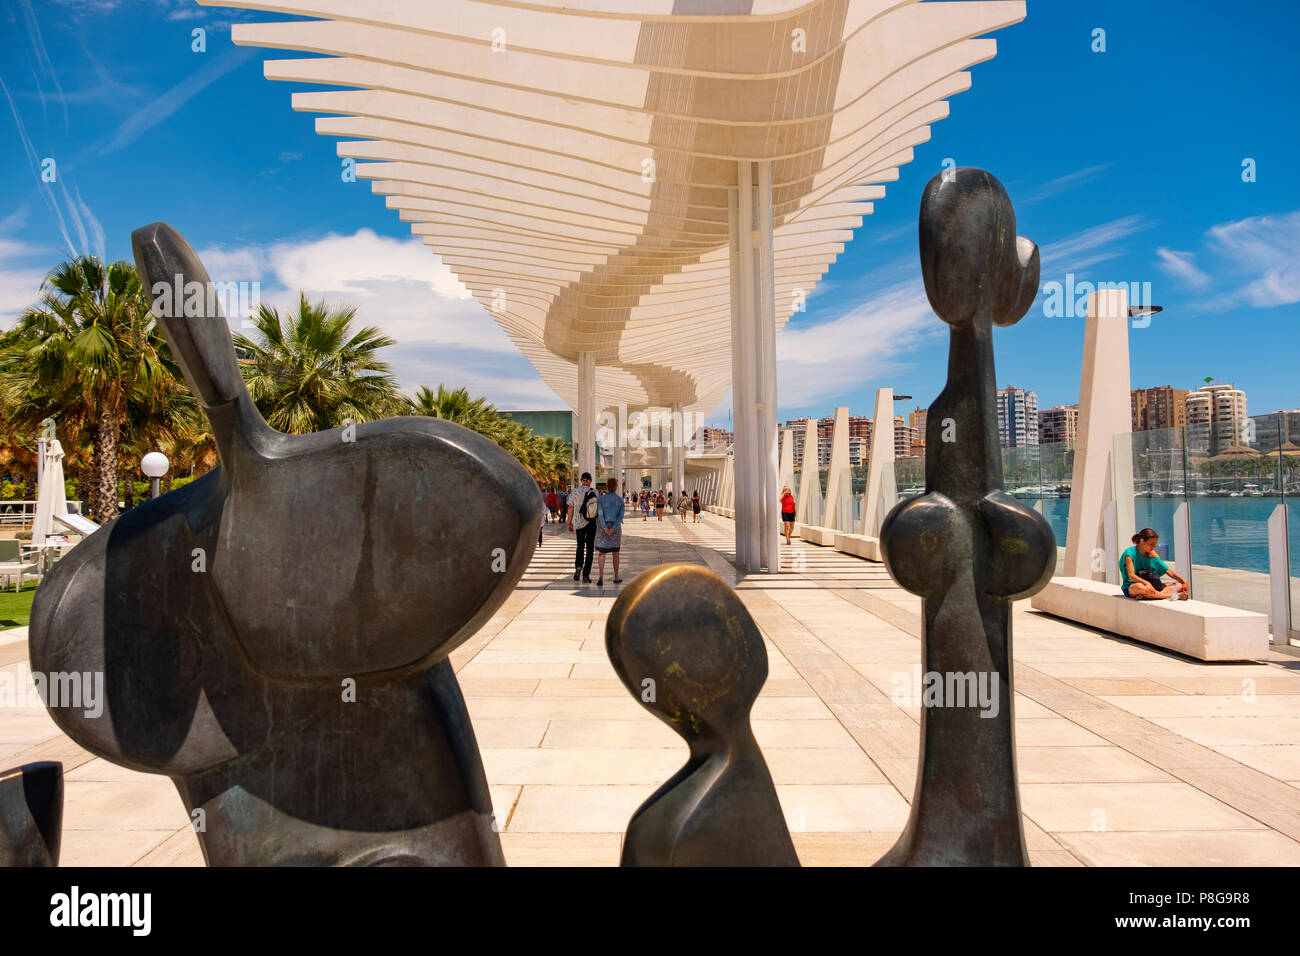 Modern sculptures. Muelle Uno. Dock One. Seaside promenade at port, Malaga city. Costa del Sol, Andalusia. Southern Spain Europe Stock Photo